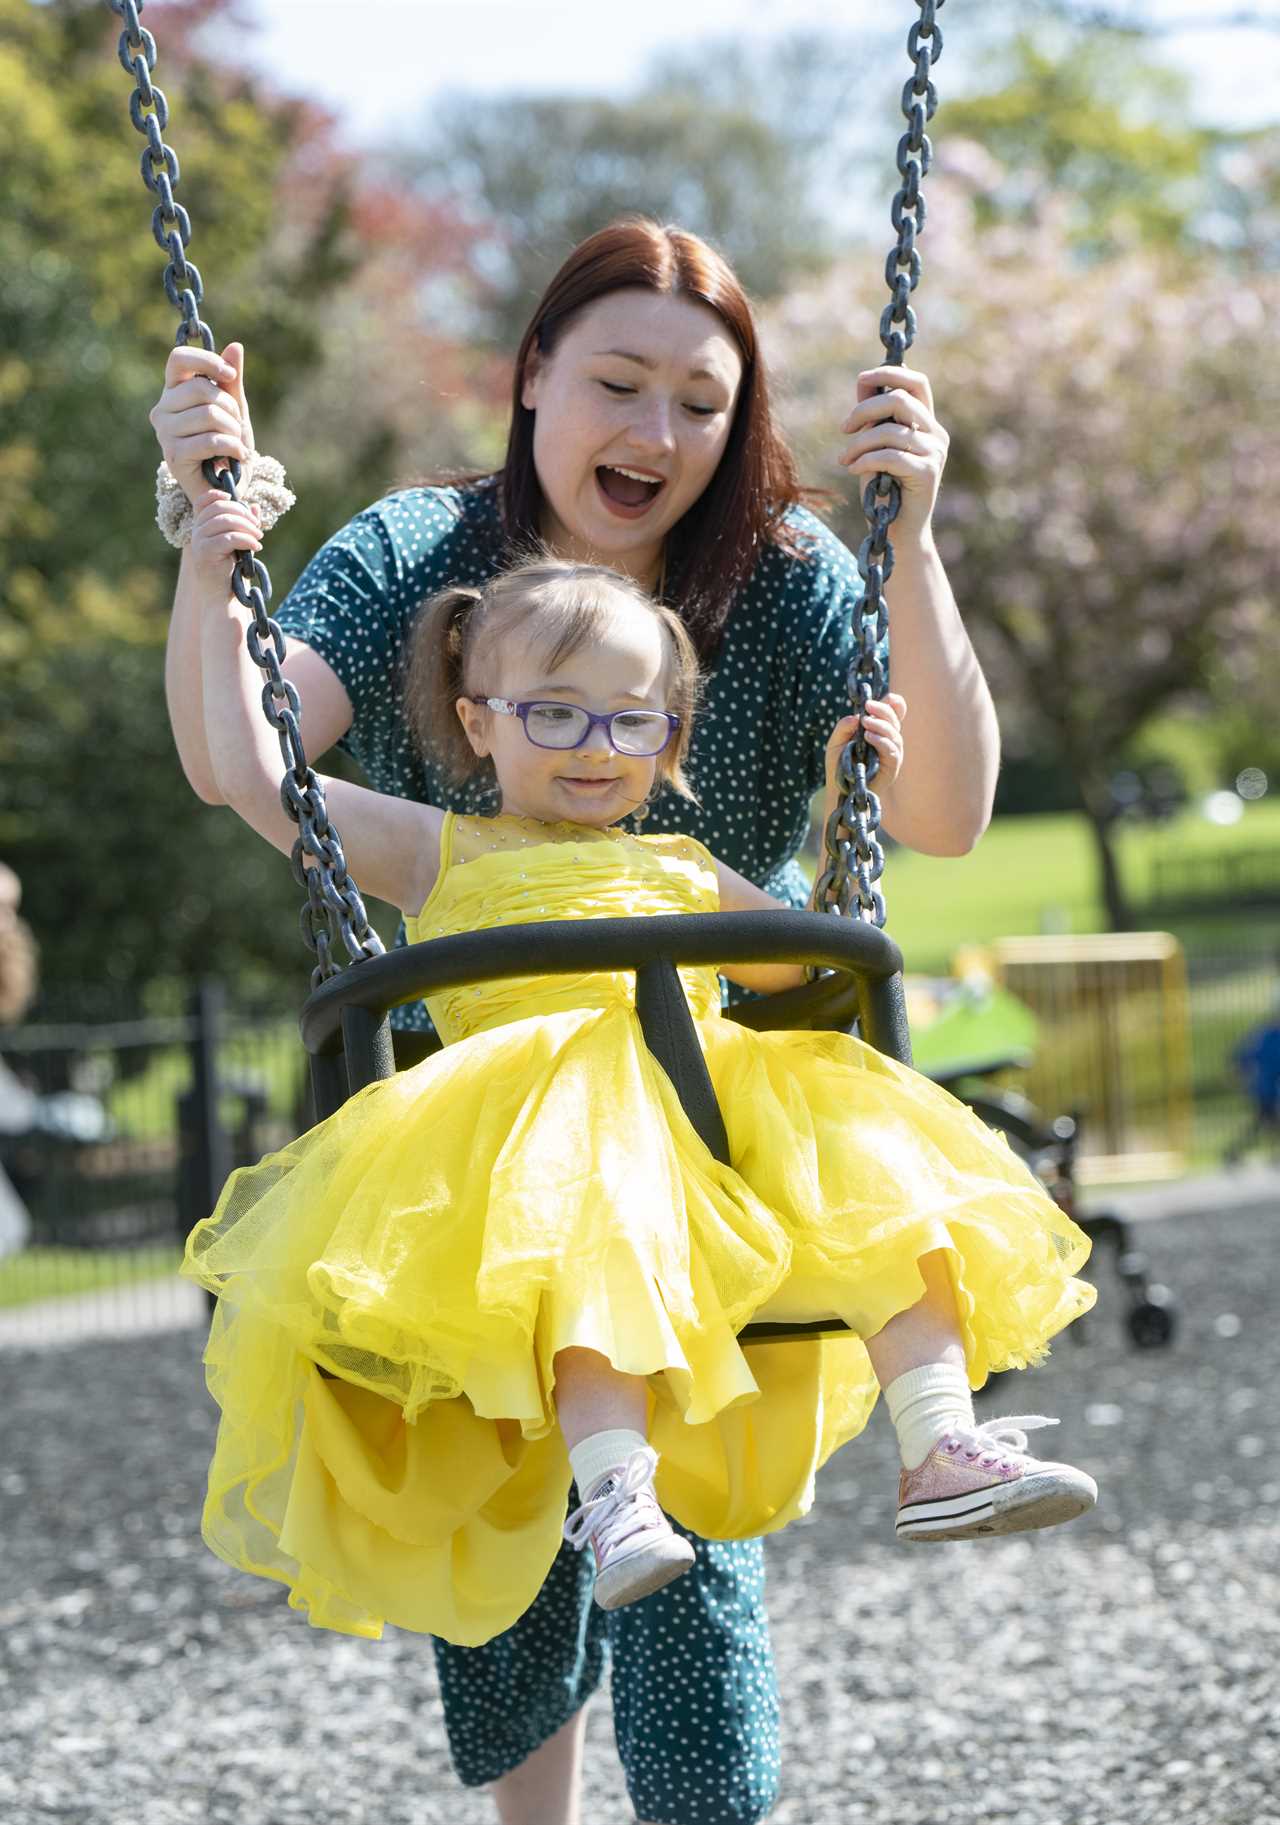 Brave cancer survivor, 4, plays on swing after beating brain tumour size of golf ball